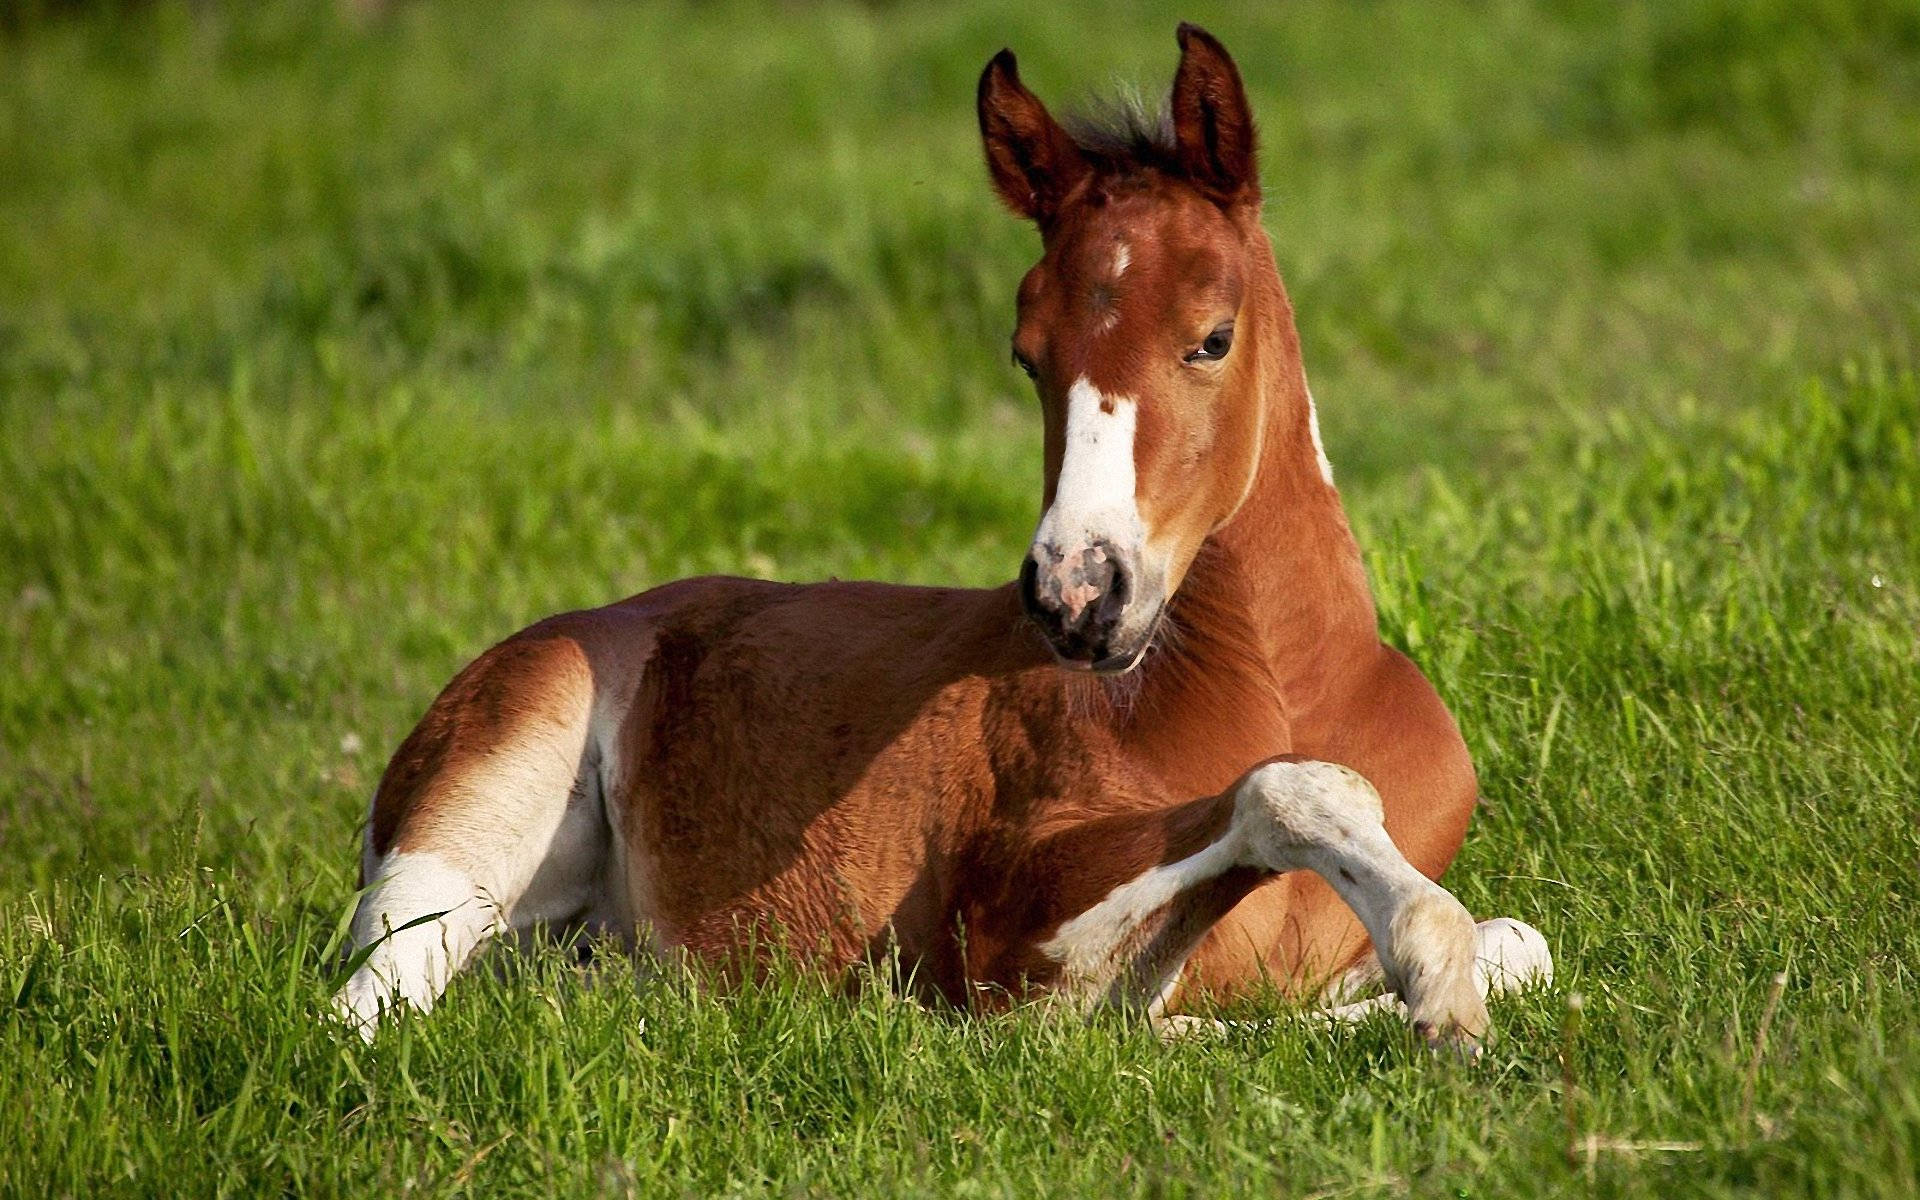 Cute Horse Relaxing On The Grass